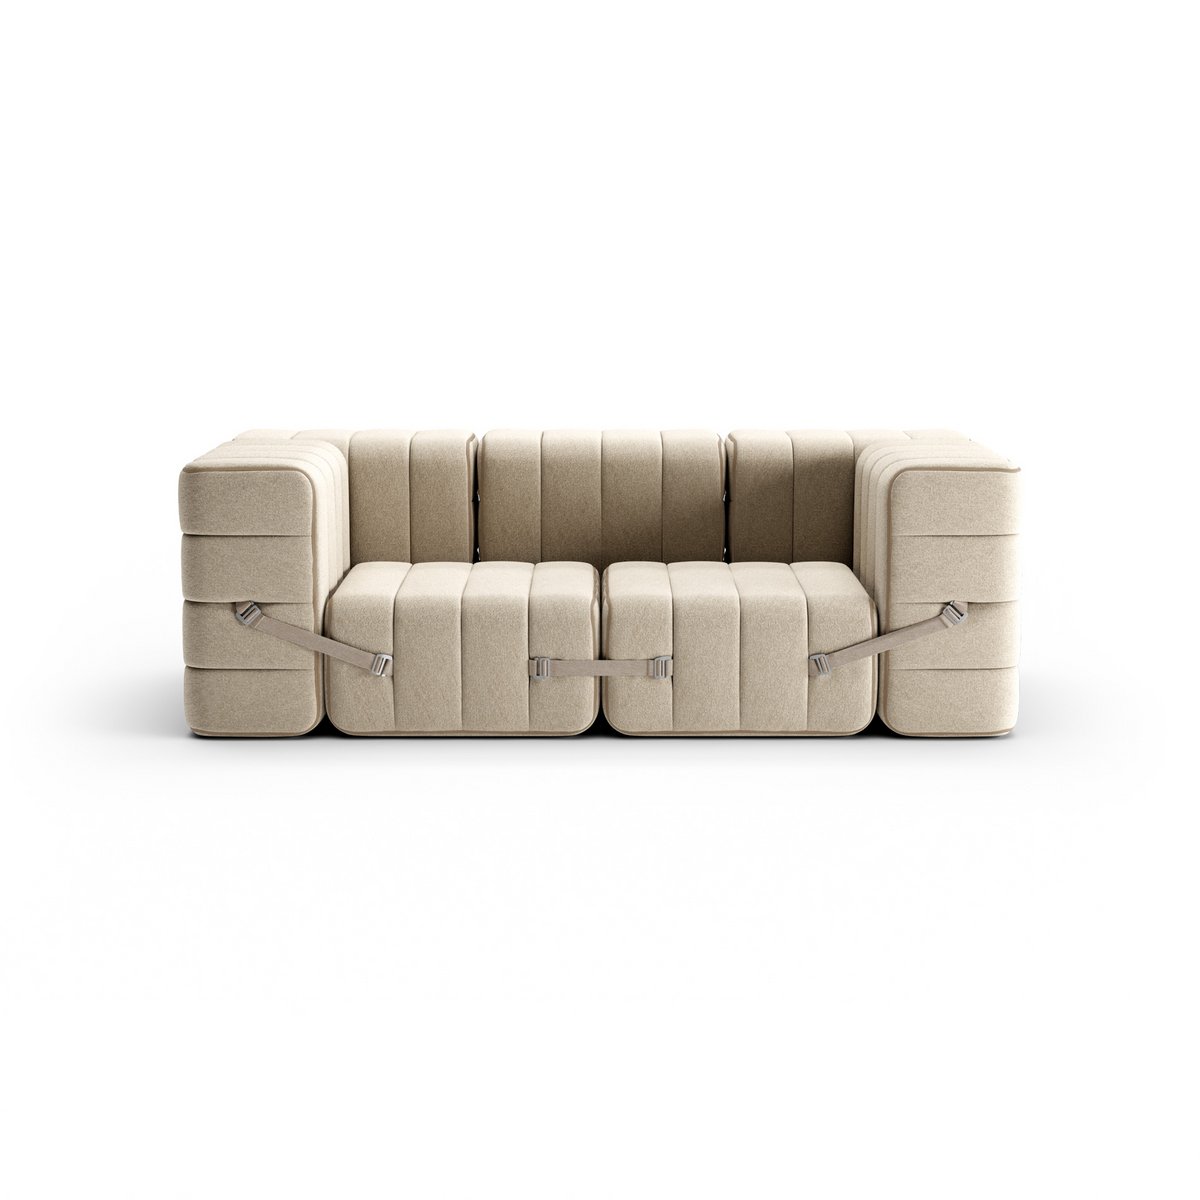 Curt-Set 7 - e.g. Flexible 2-seater with armrests